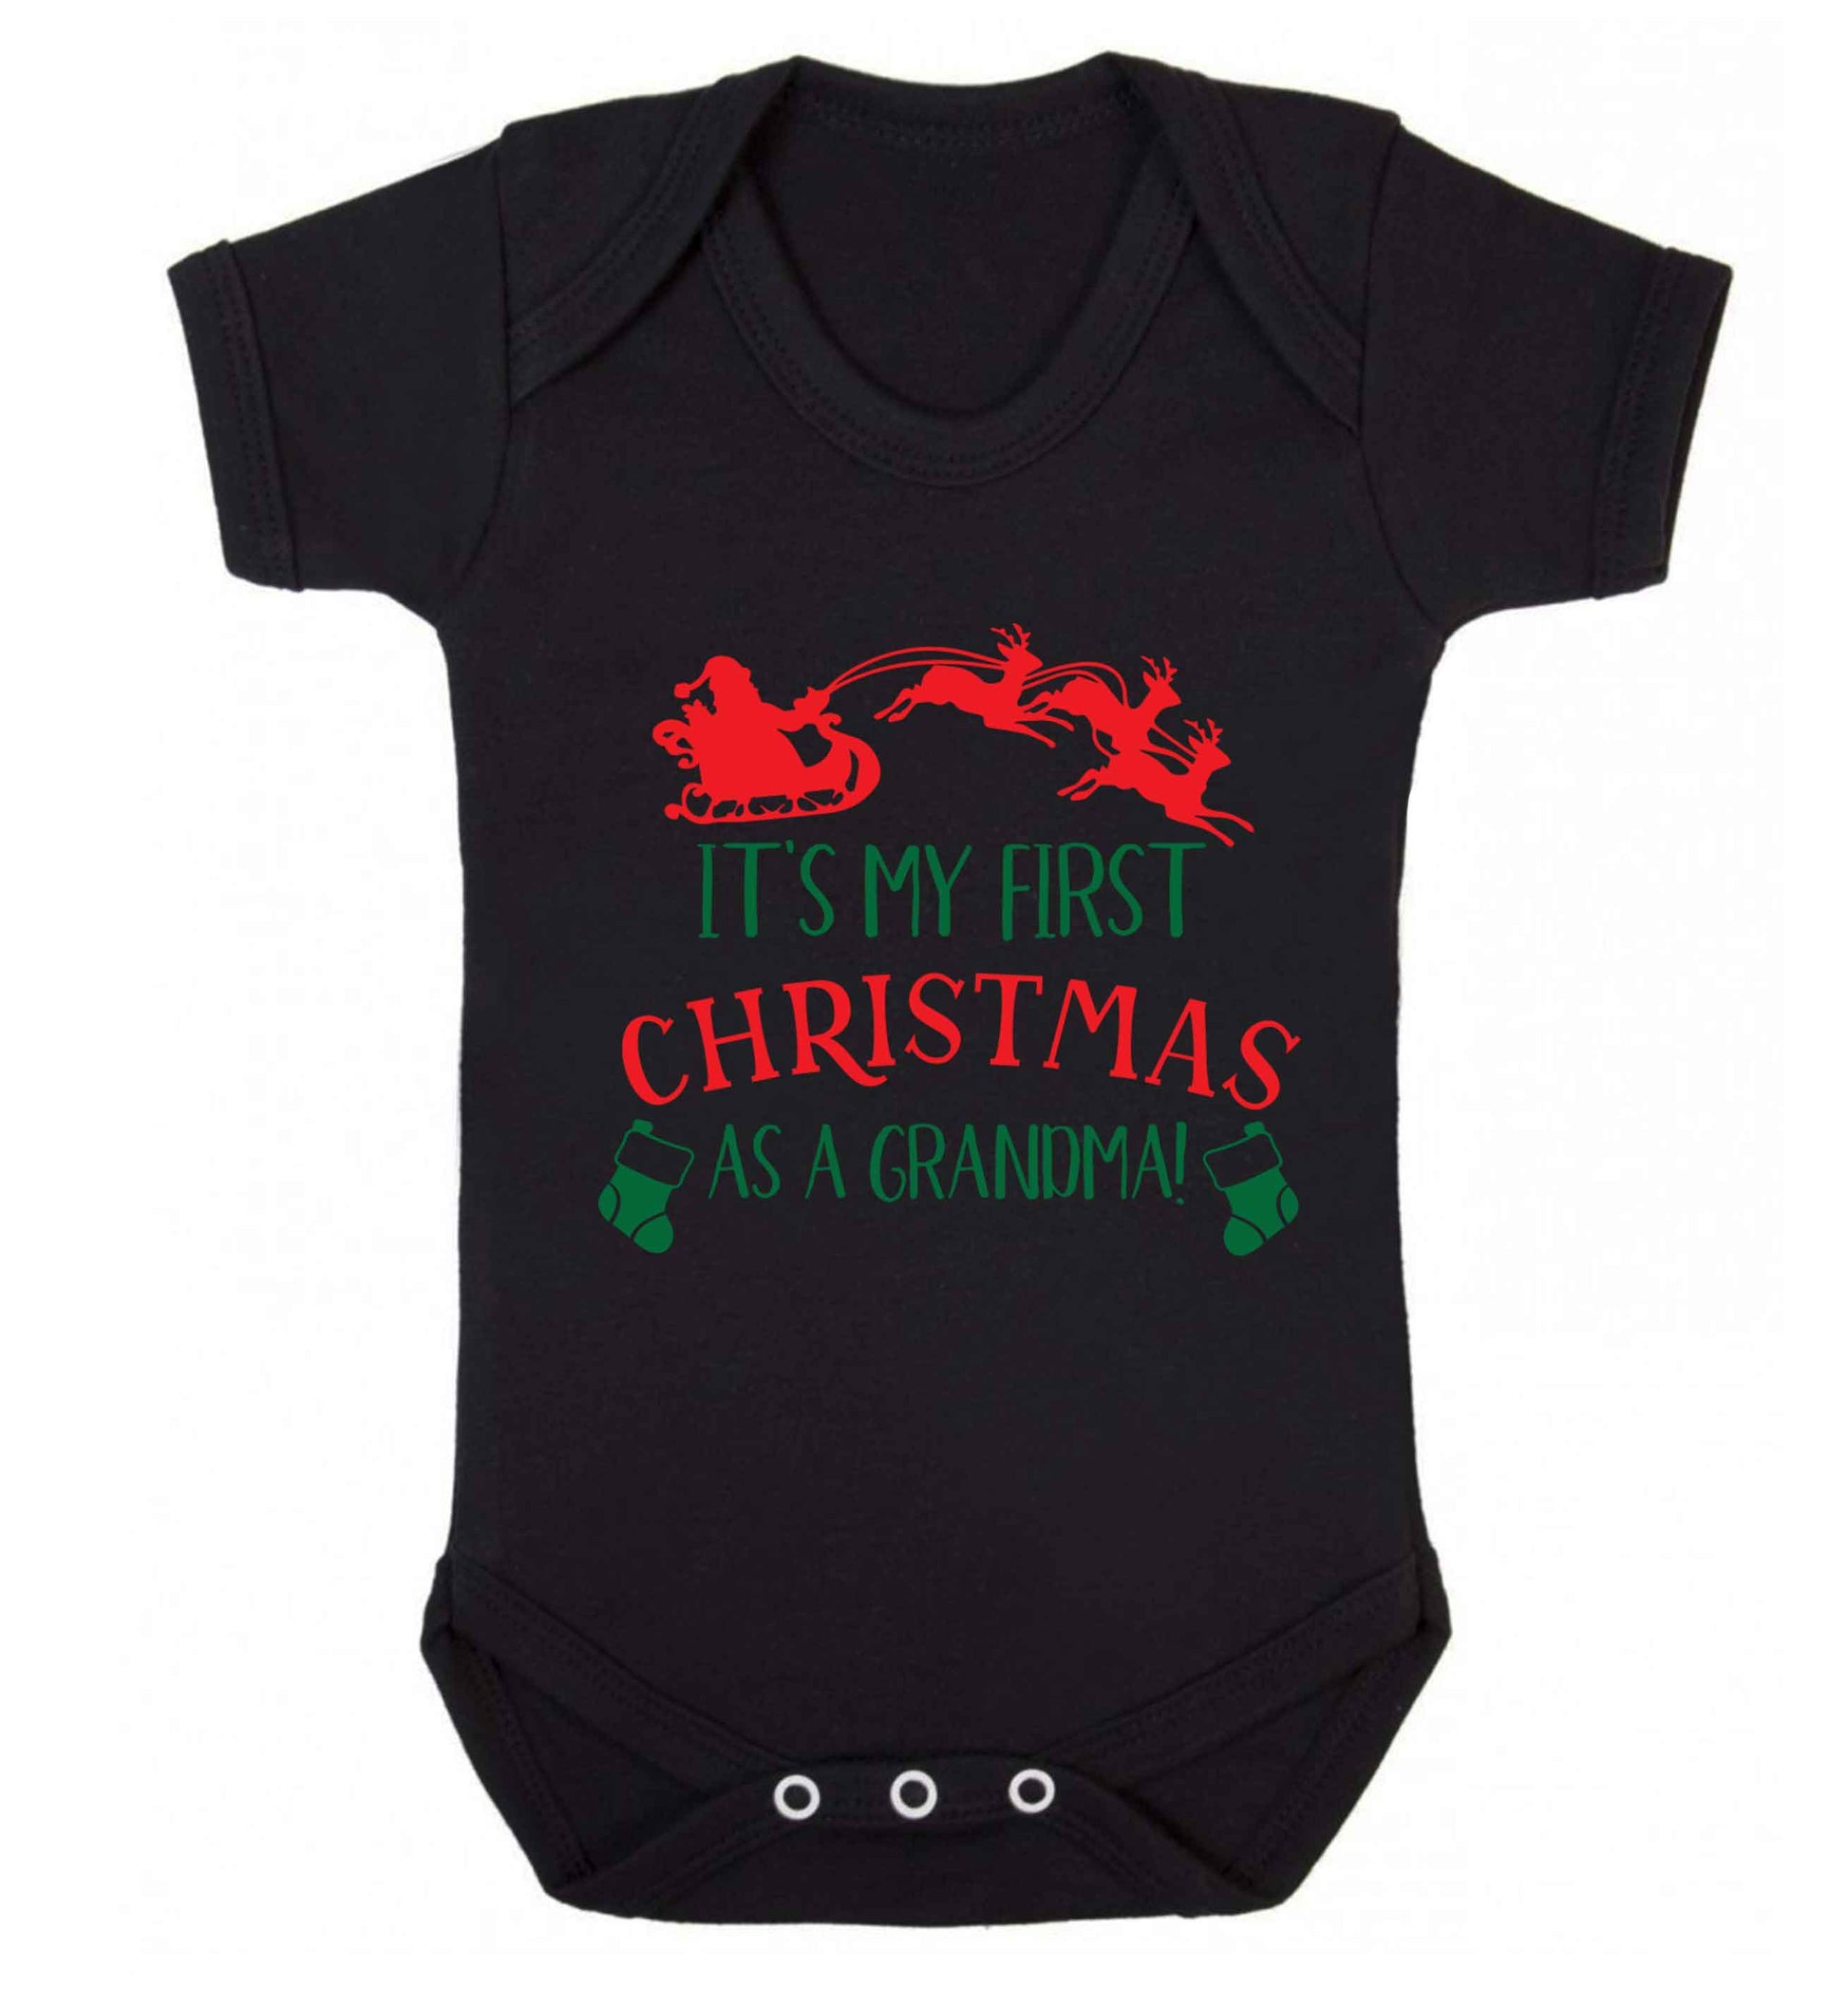 It's my first Christmas as a grandma! Baby Vest black 18-24 months